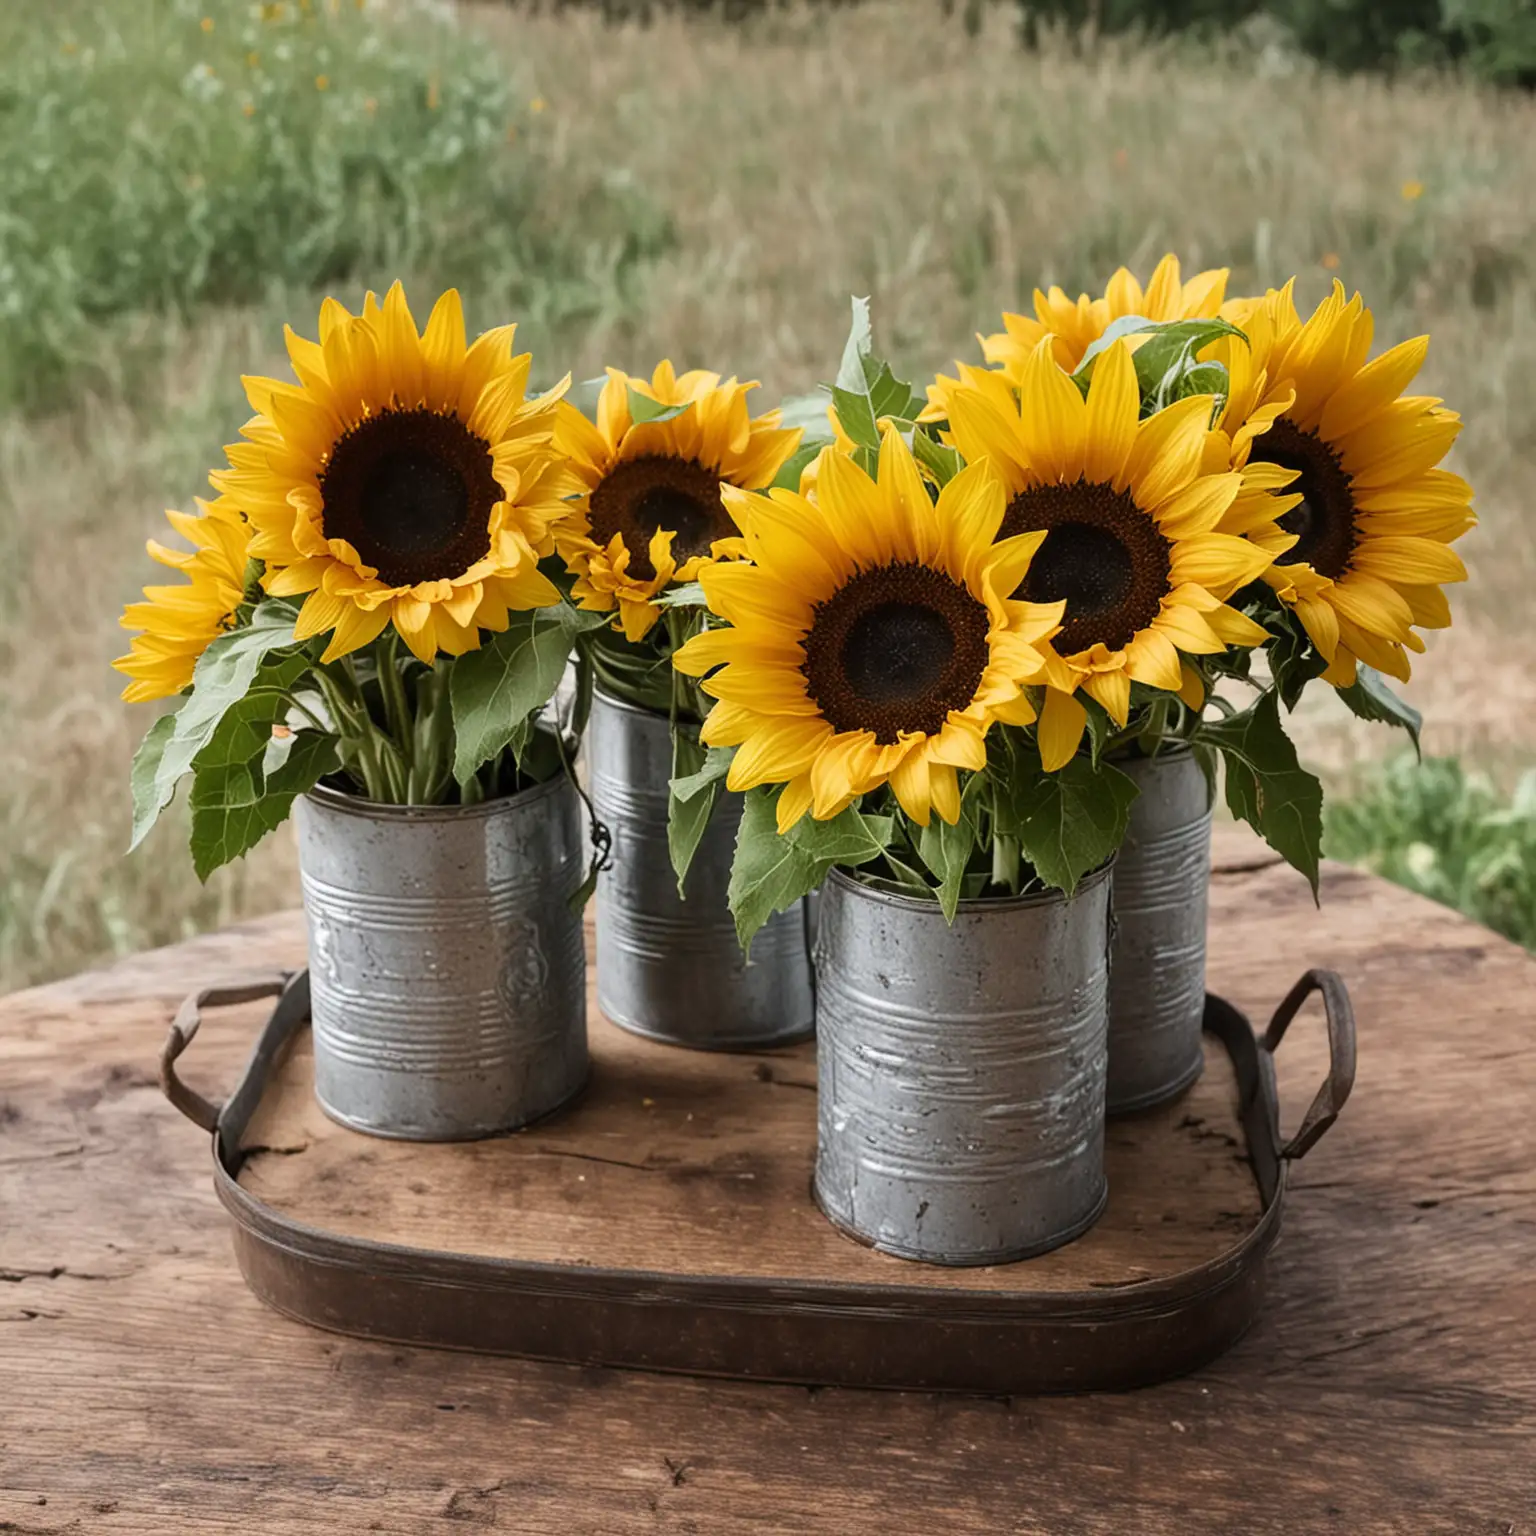 Rustic-Sunflower-Centerpiece-in-Tin-Can-Vases